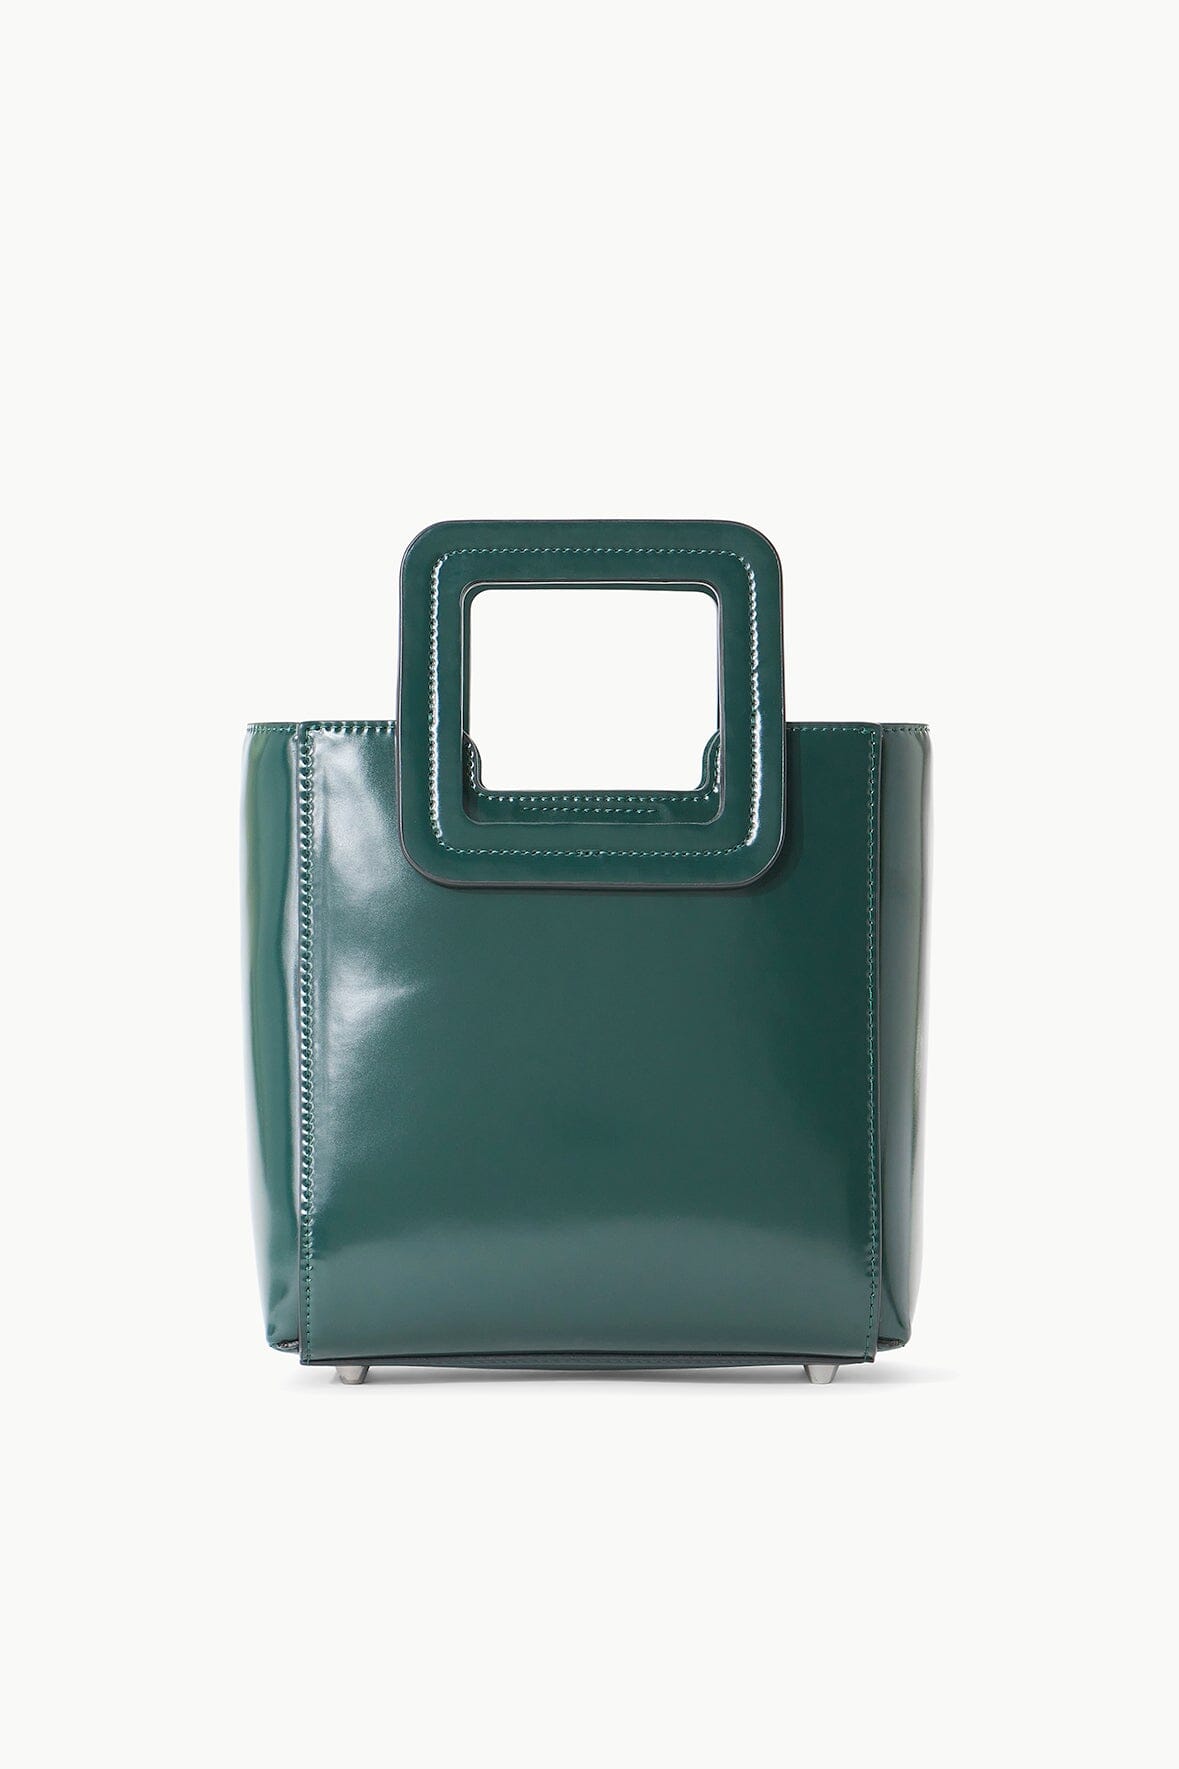 STAUD, Mini Shirley Leather Bag for Female in Pine Polished